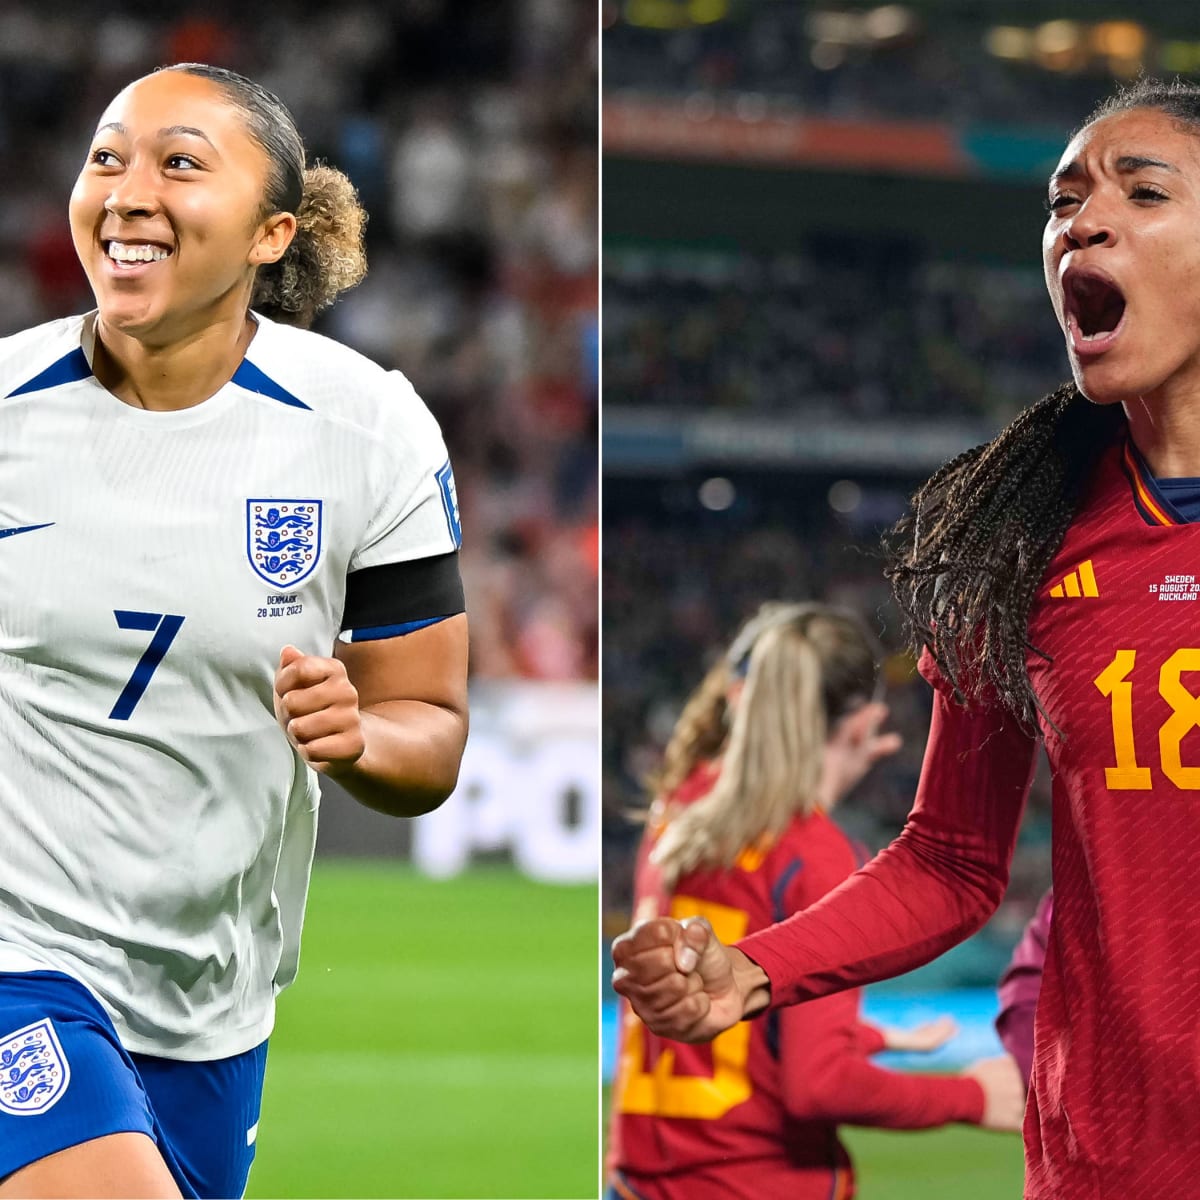 FIFA Women's World Cup Final 2023: Spain vs England - tactical preview